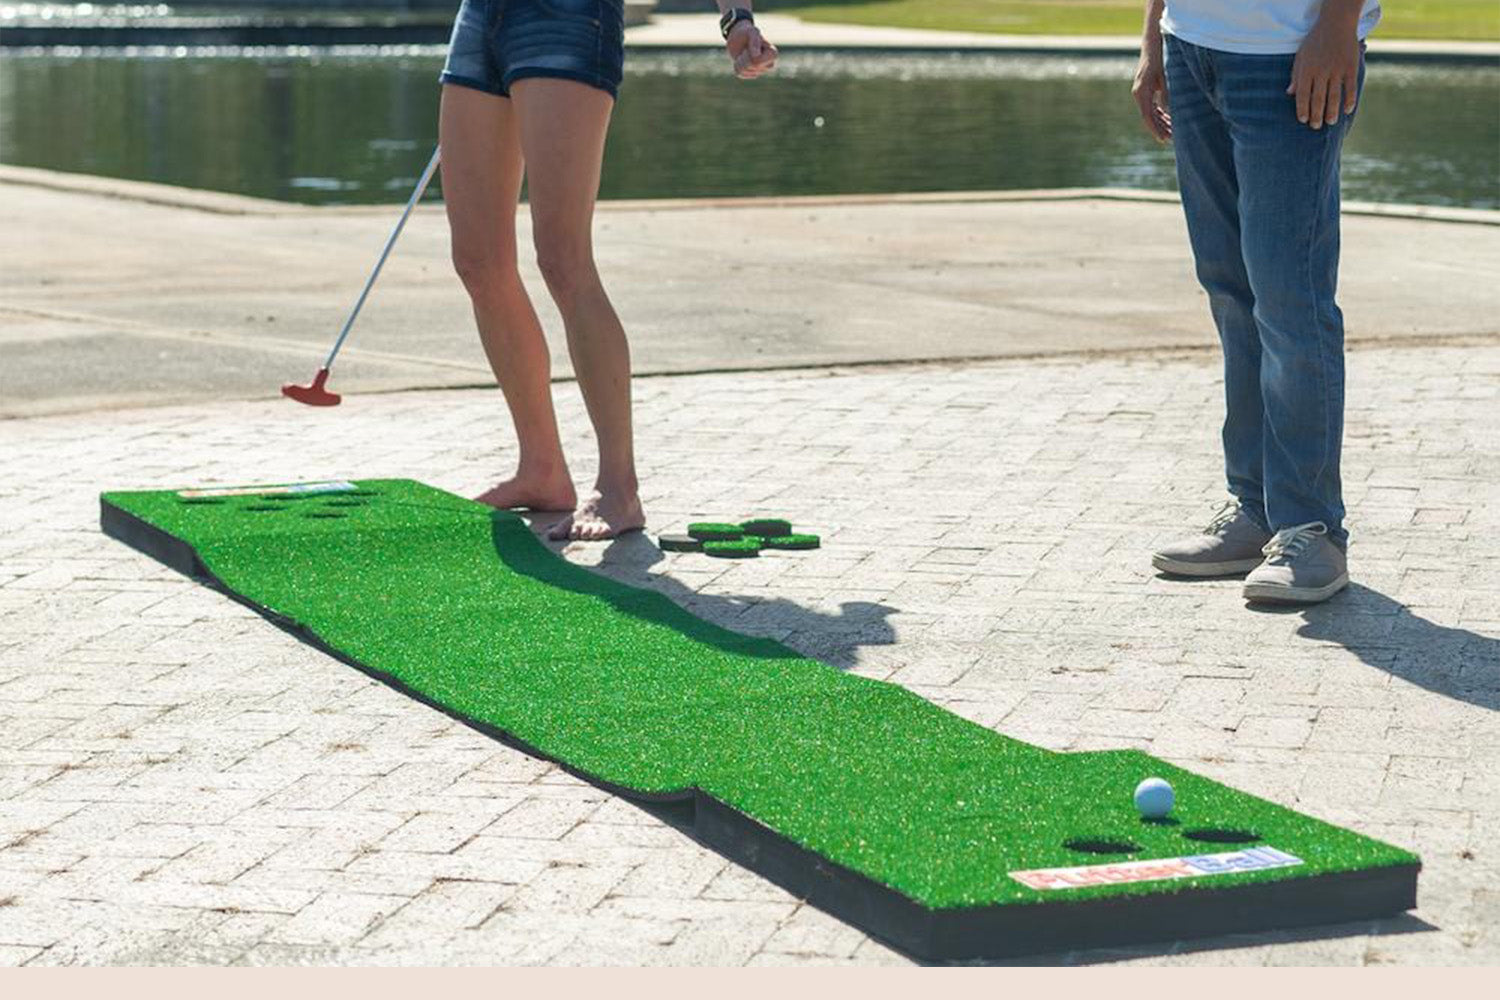 Four Giant Yard Games for Your Next BBQ Party